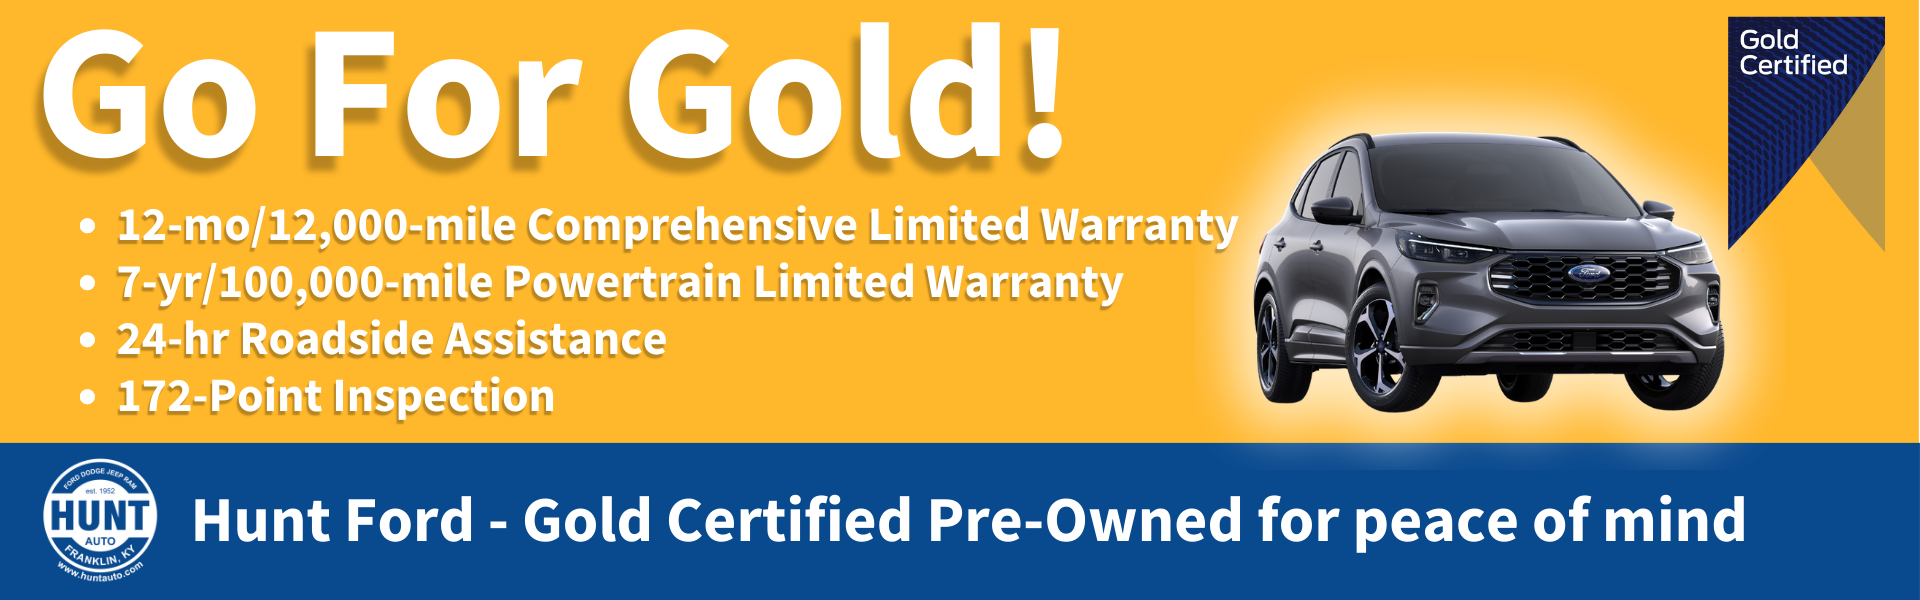 Hunt Ford's Gold Certified Pre-Owned are better Used Cars!